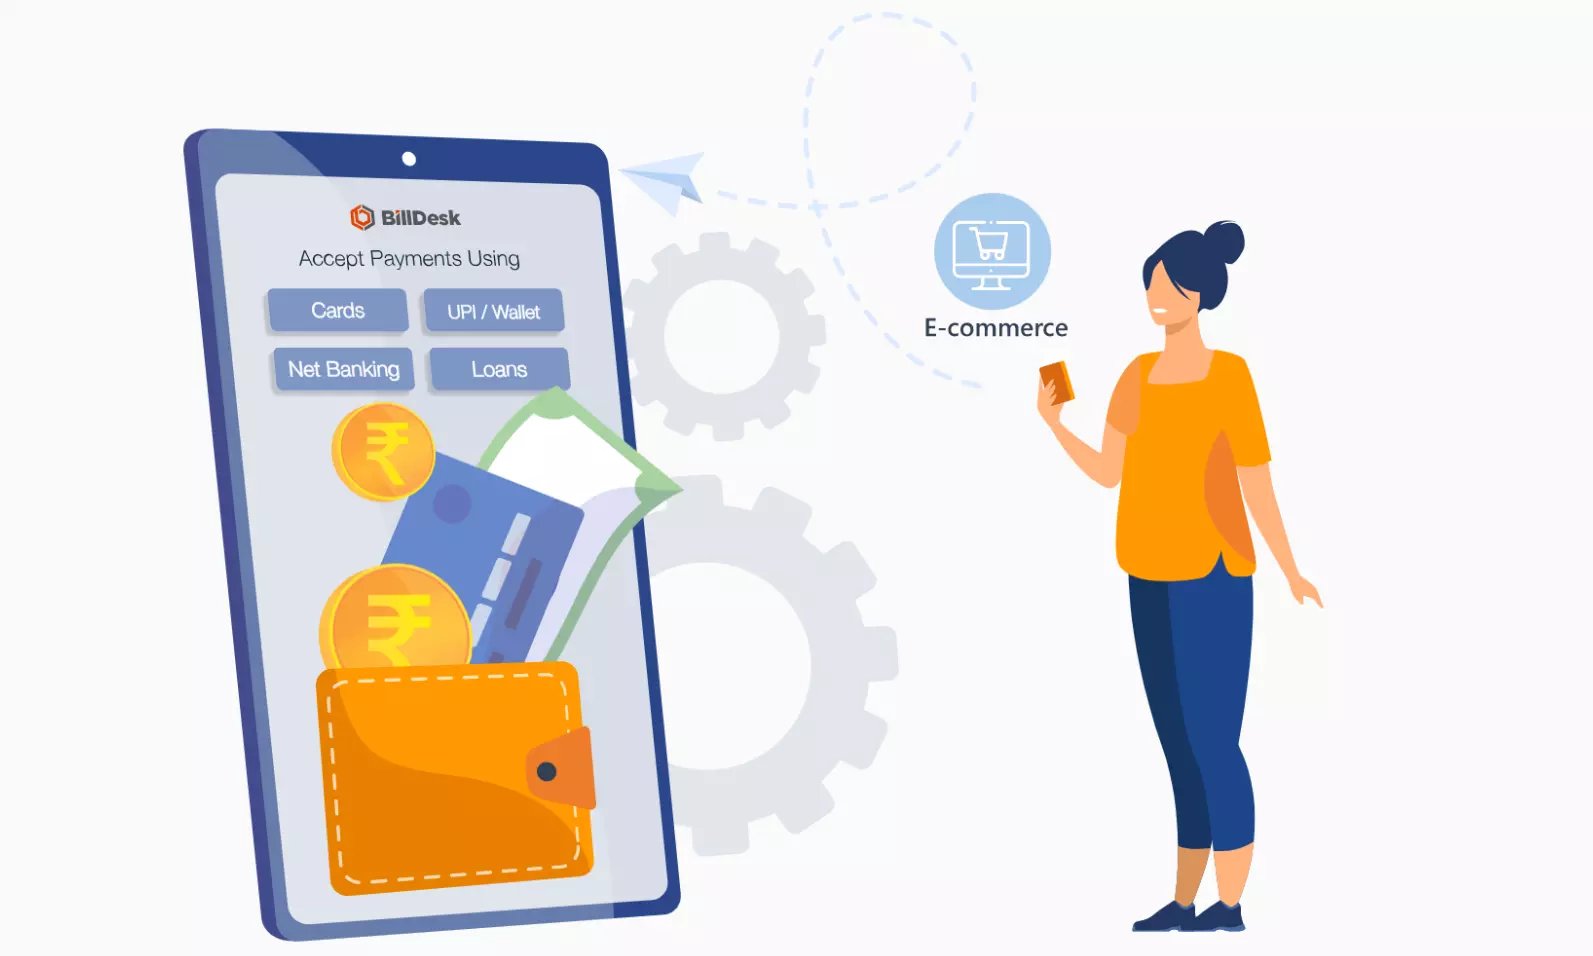 Shiprocket joins hands with BillDesk to power digital payments